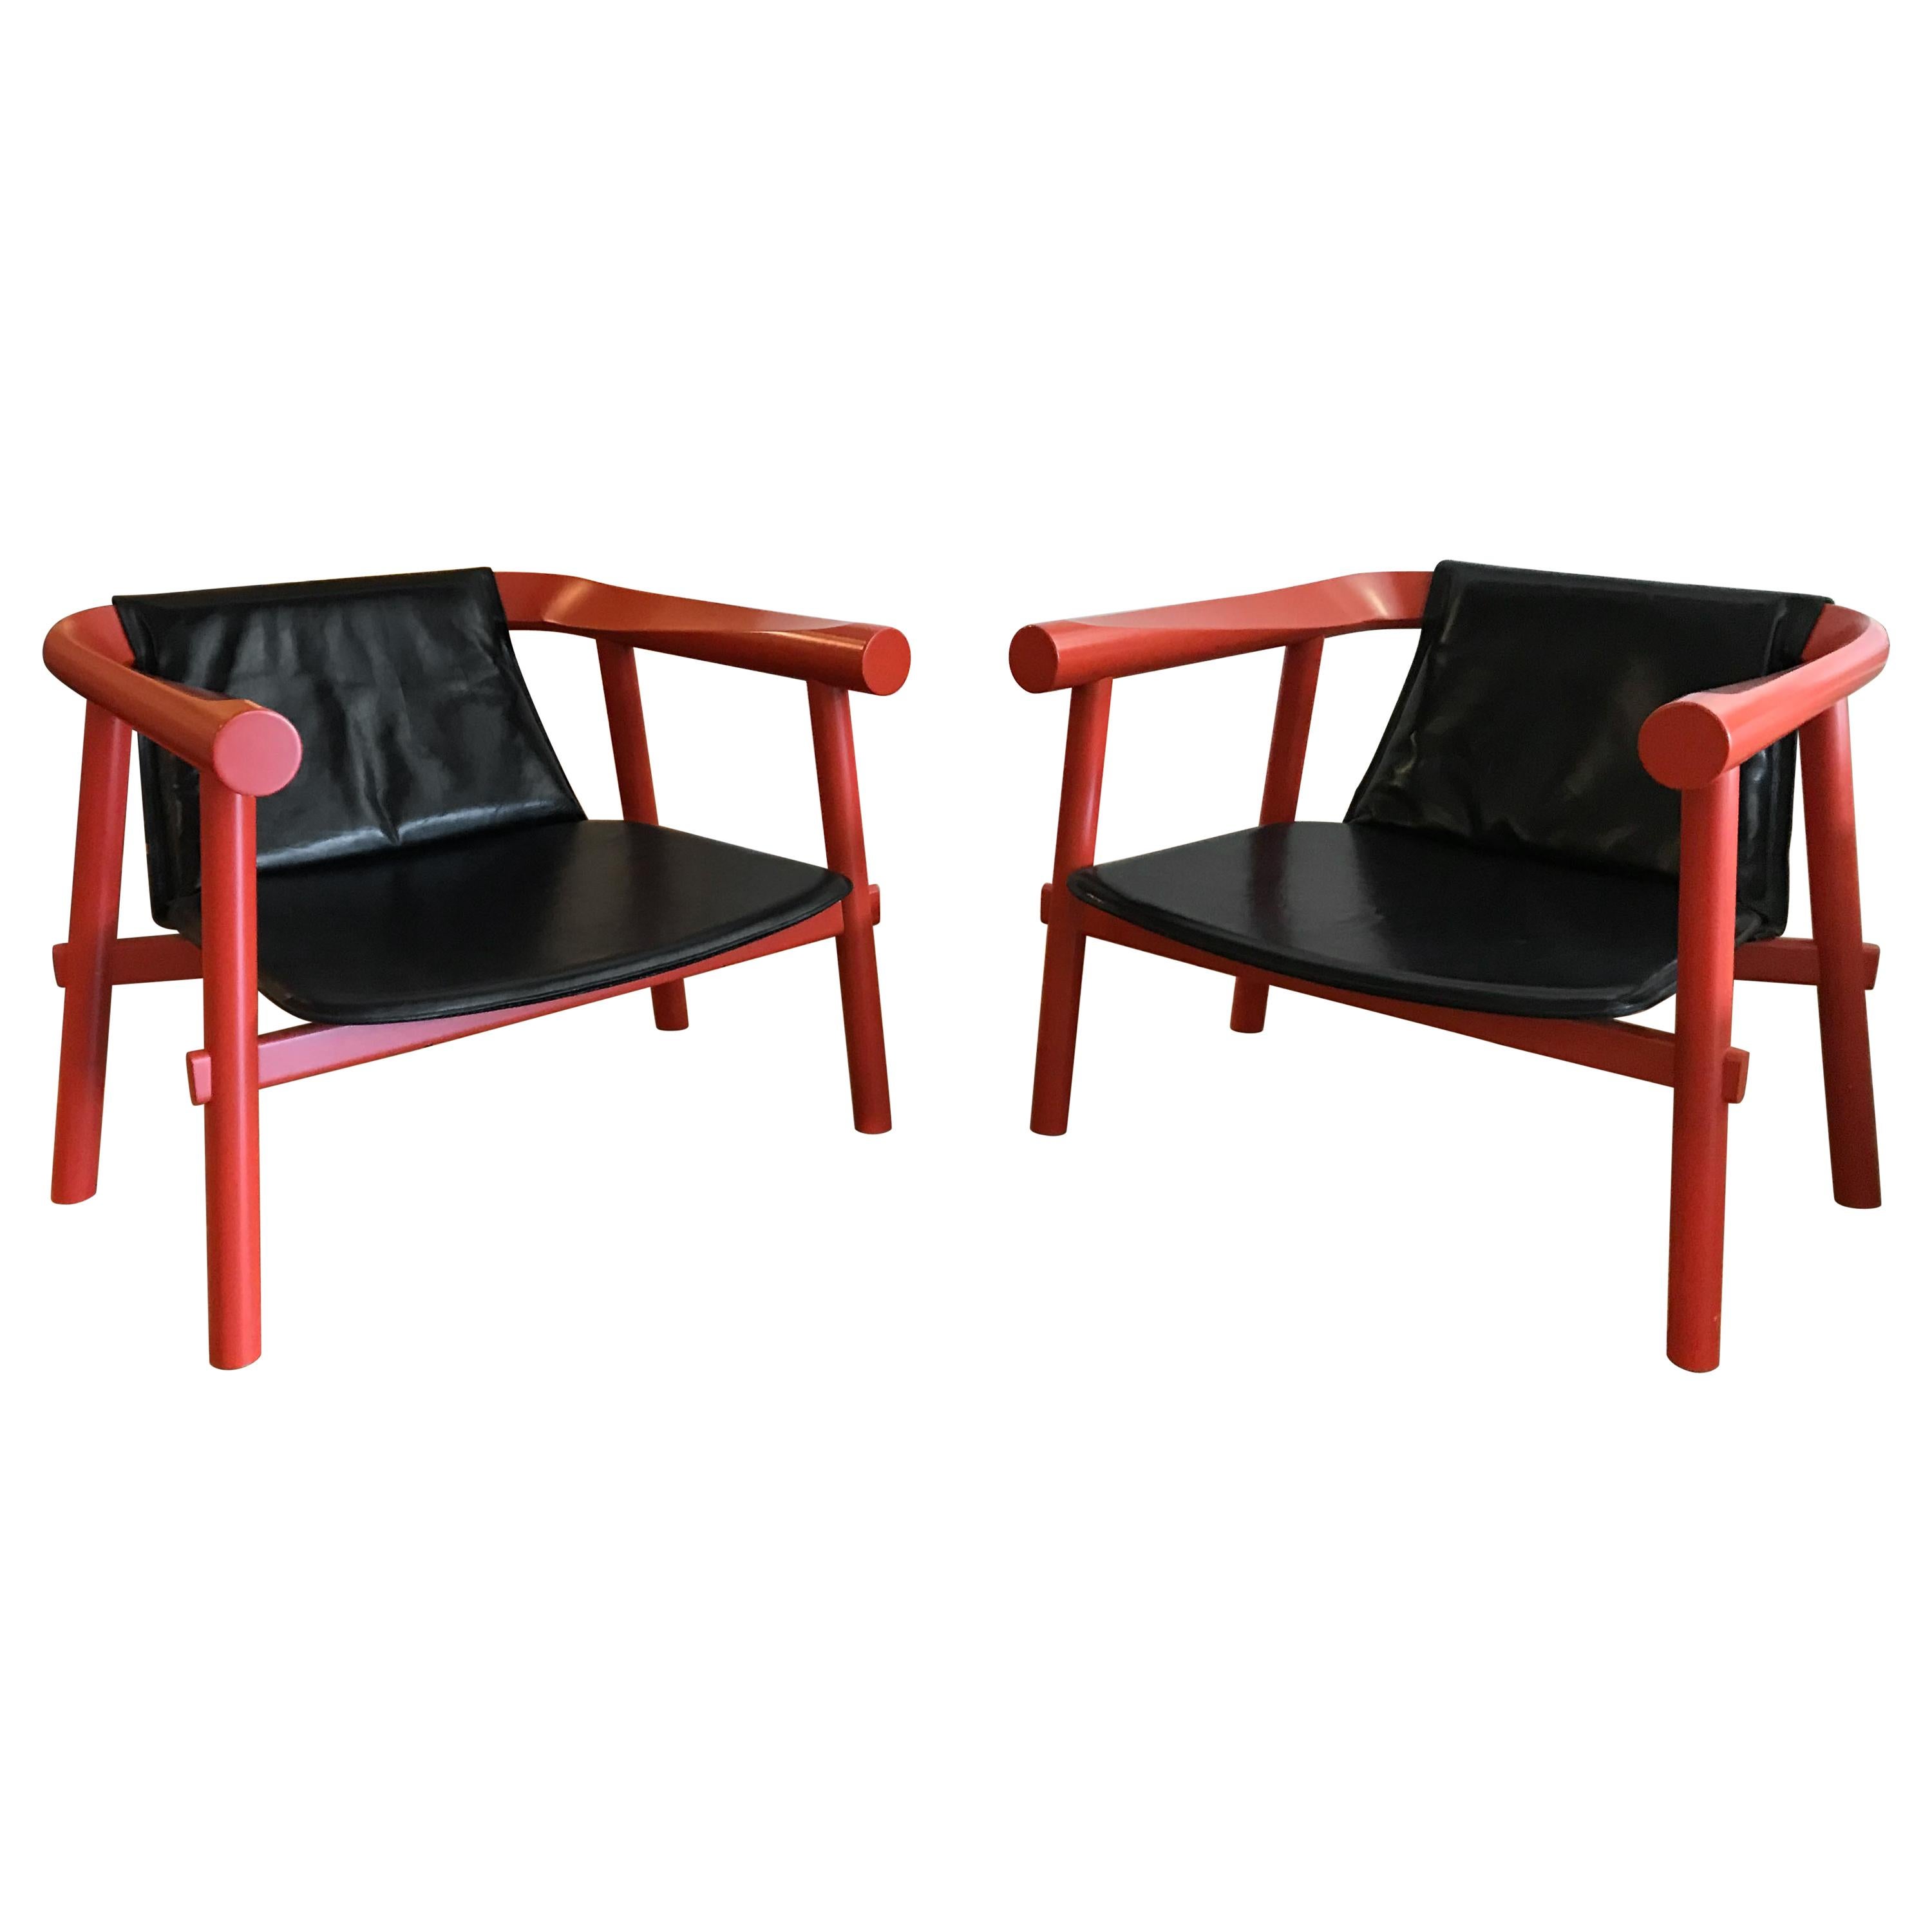 Pair of Patricia Urquiola for Artelano Log Chairs For Sale